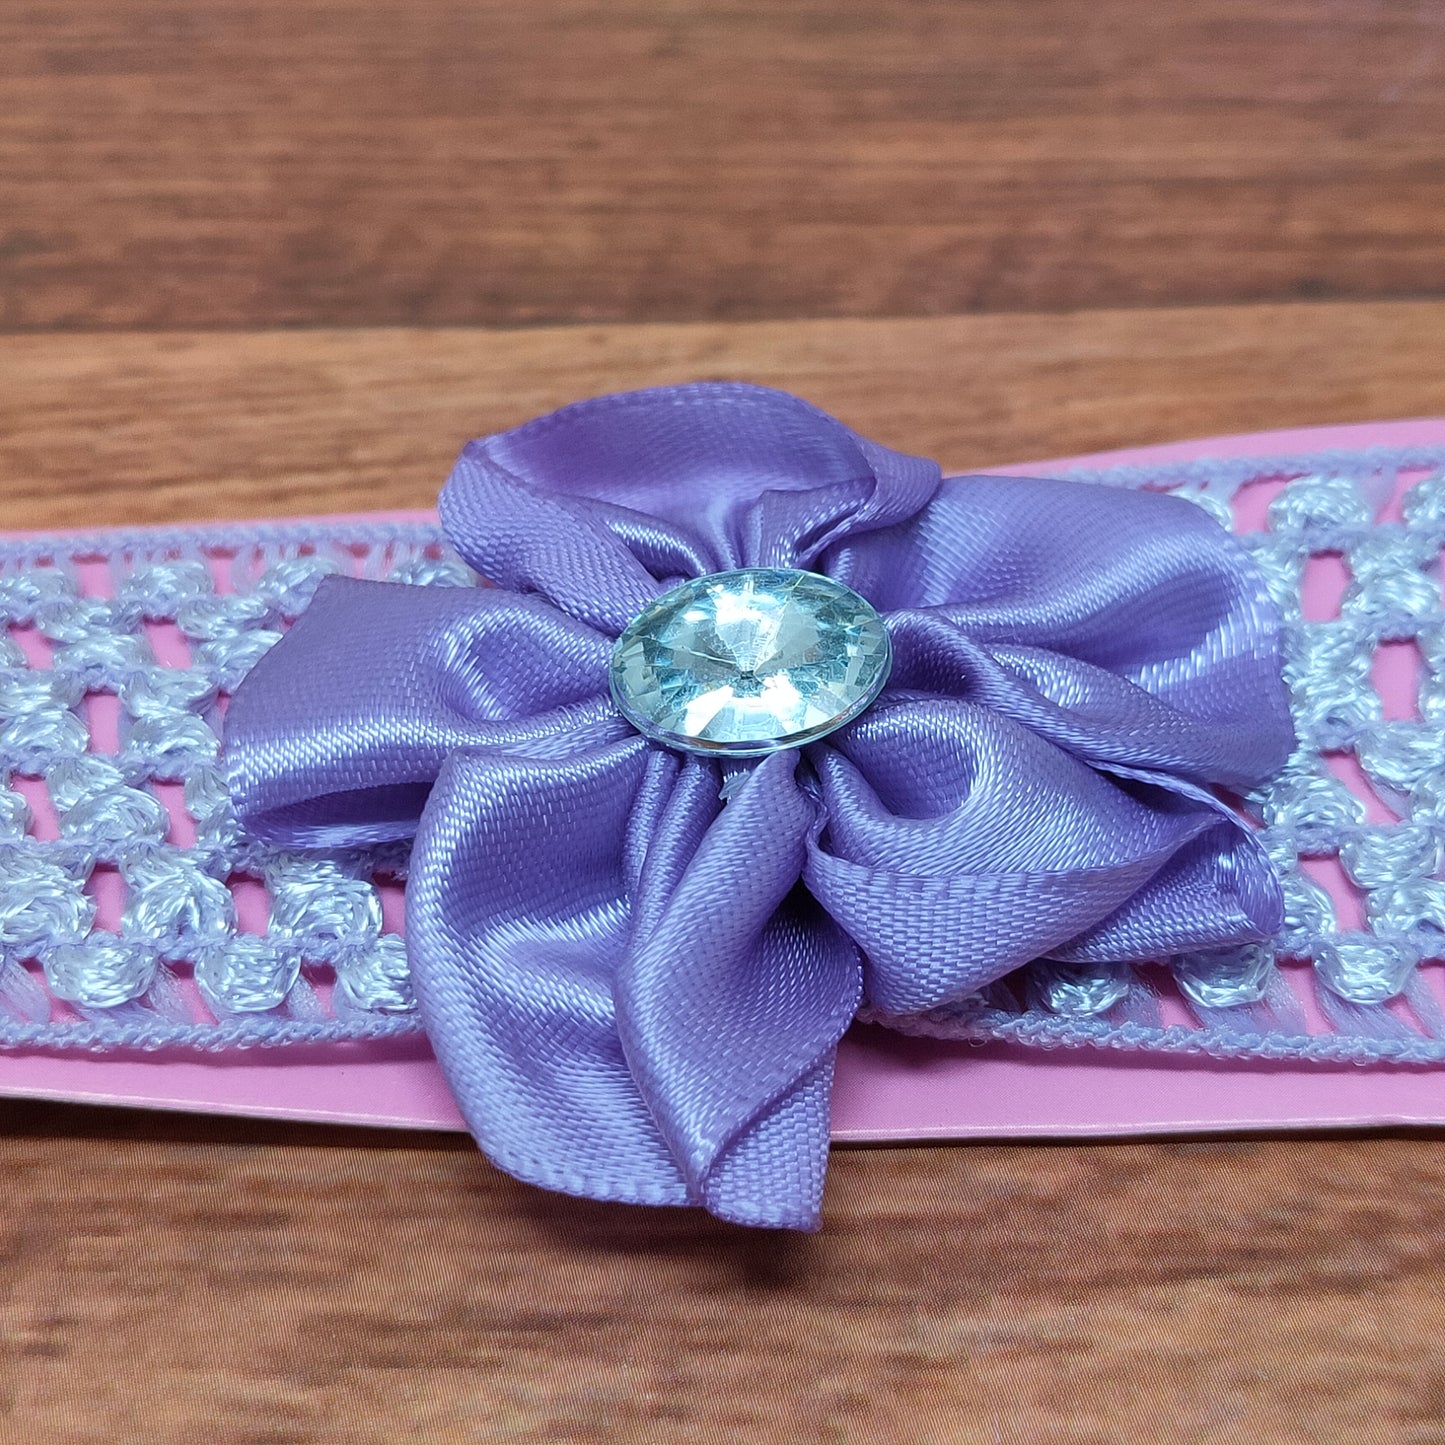 Floral Soft Stretchy Headbands for Baby Girls and Newborn (17-32 Baby Headband)